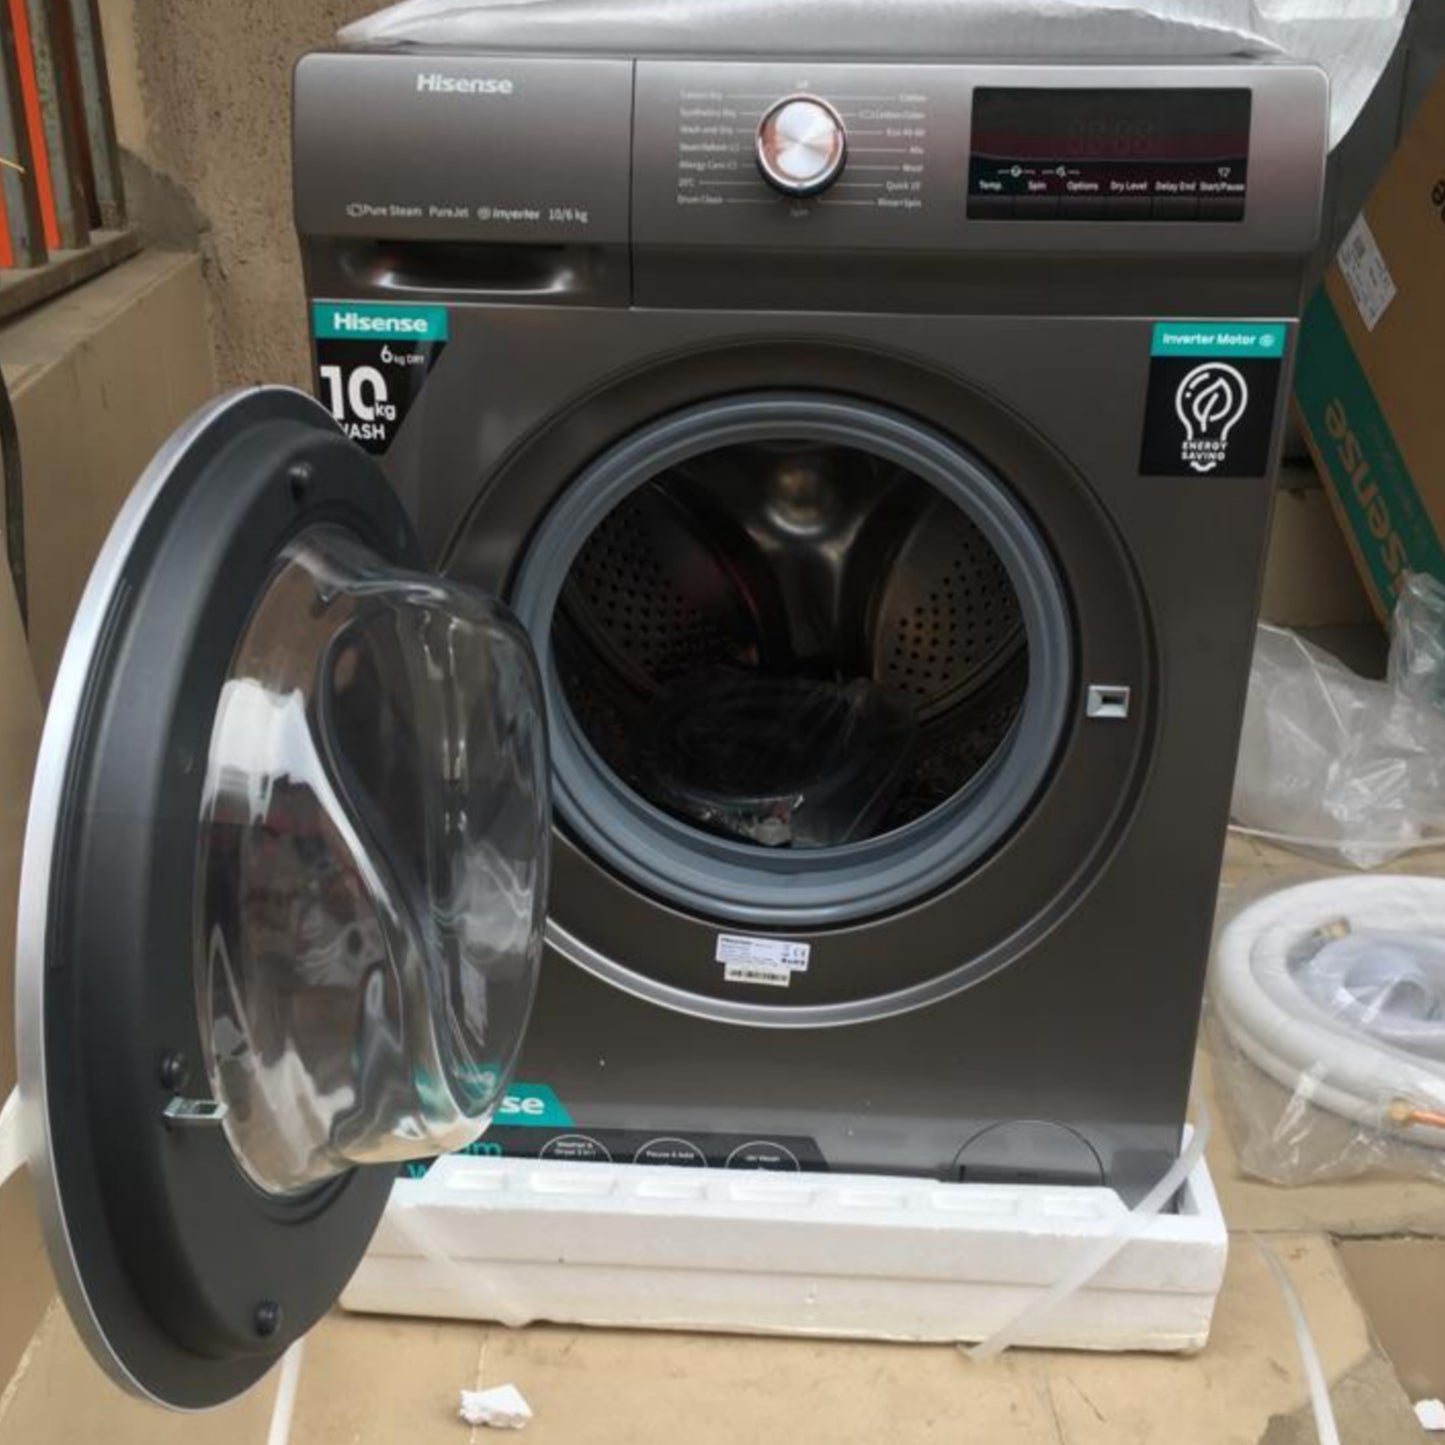 Hisense WM1014-WDQY 10kg Washer and 6kg Dryer Front Load Automatic Smart Inverter Washing Machine - Brand New